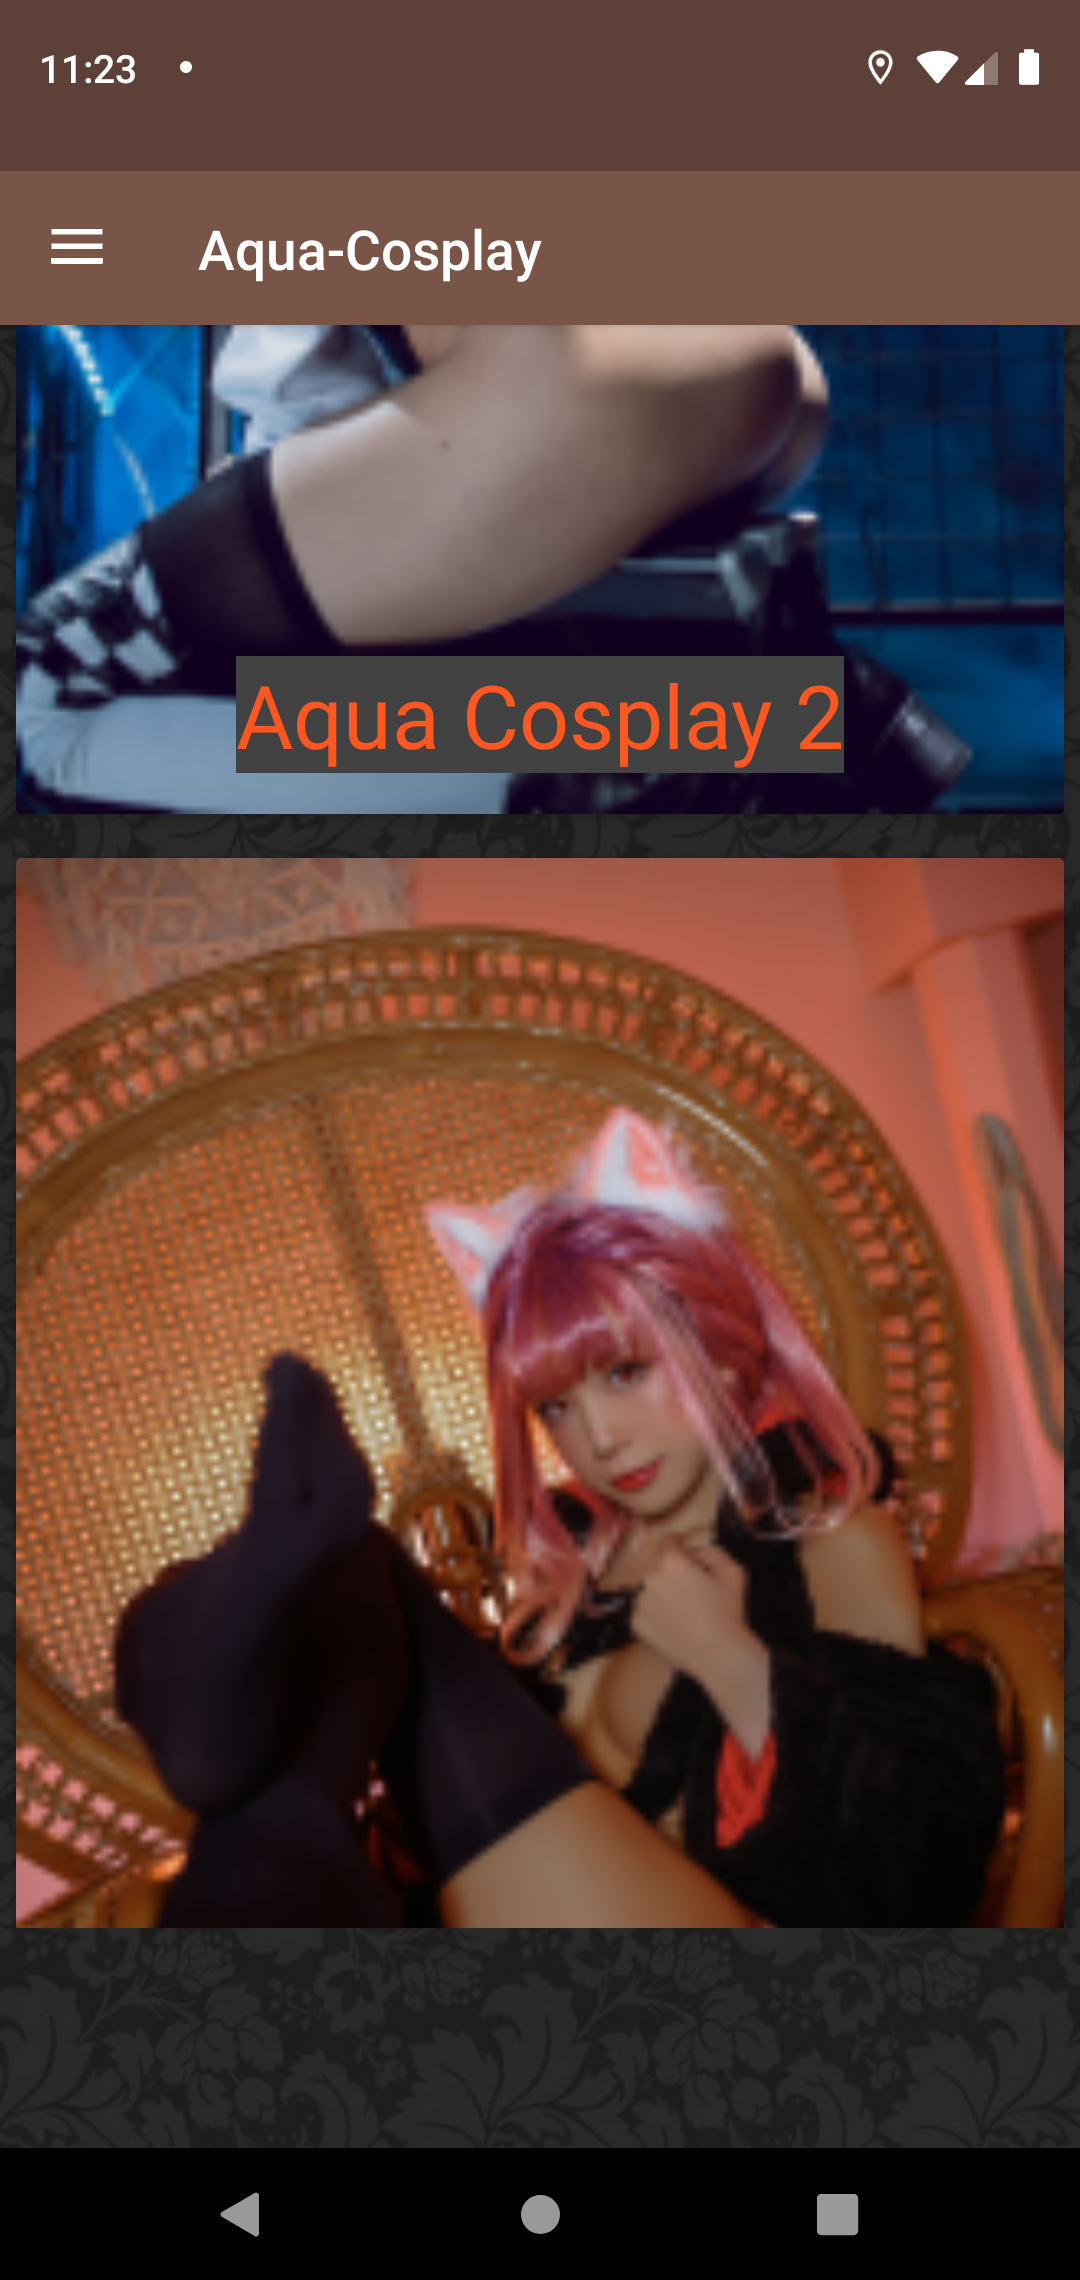 Aqua Cosplay photos,download,baixar,pictures,android,pics,adult,porn,app,cfnm,manga,how,best,gay,apps,for,cosplay,images,sexy,gallery,hentai,collection,galleries